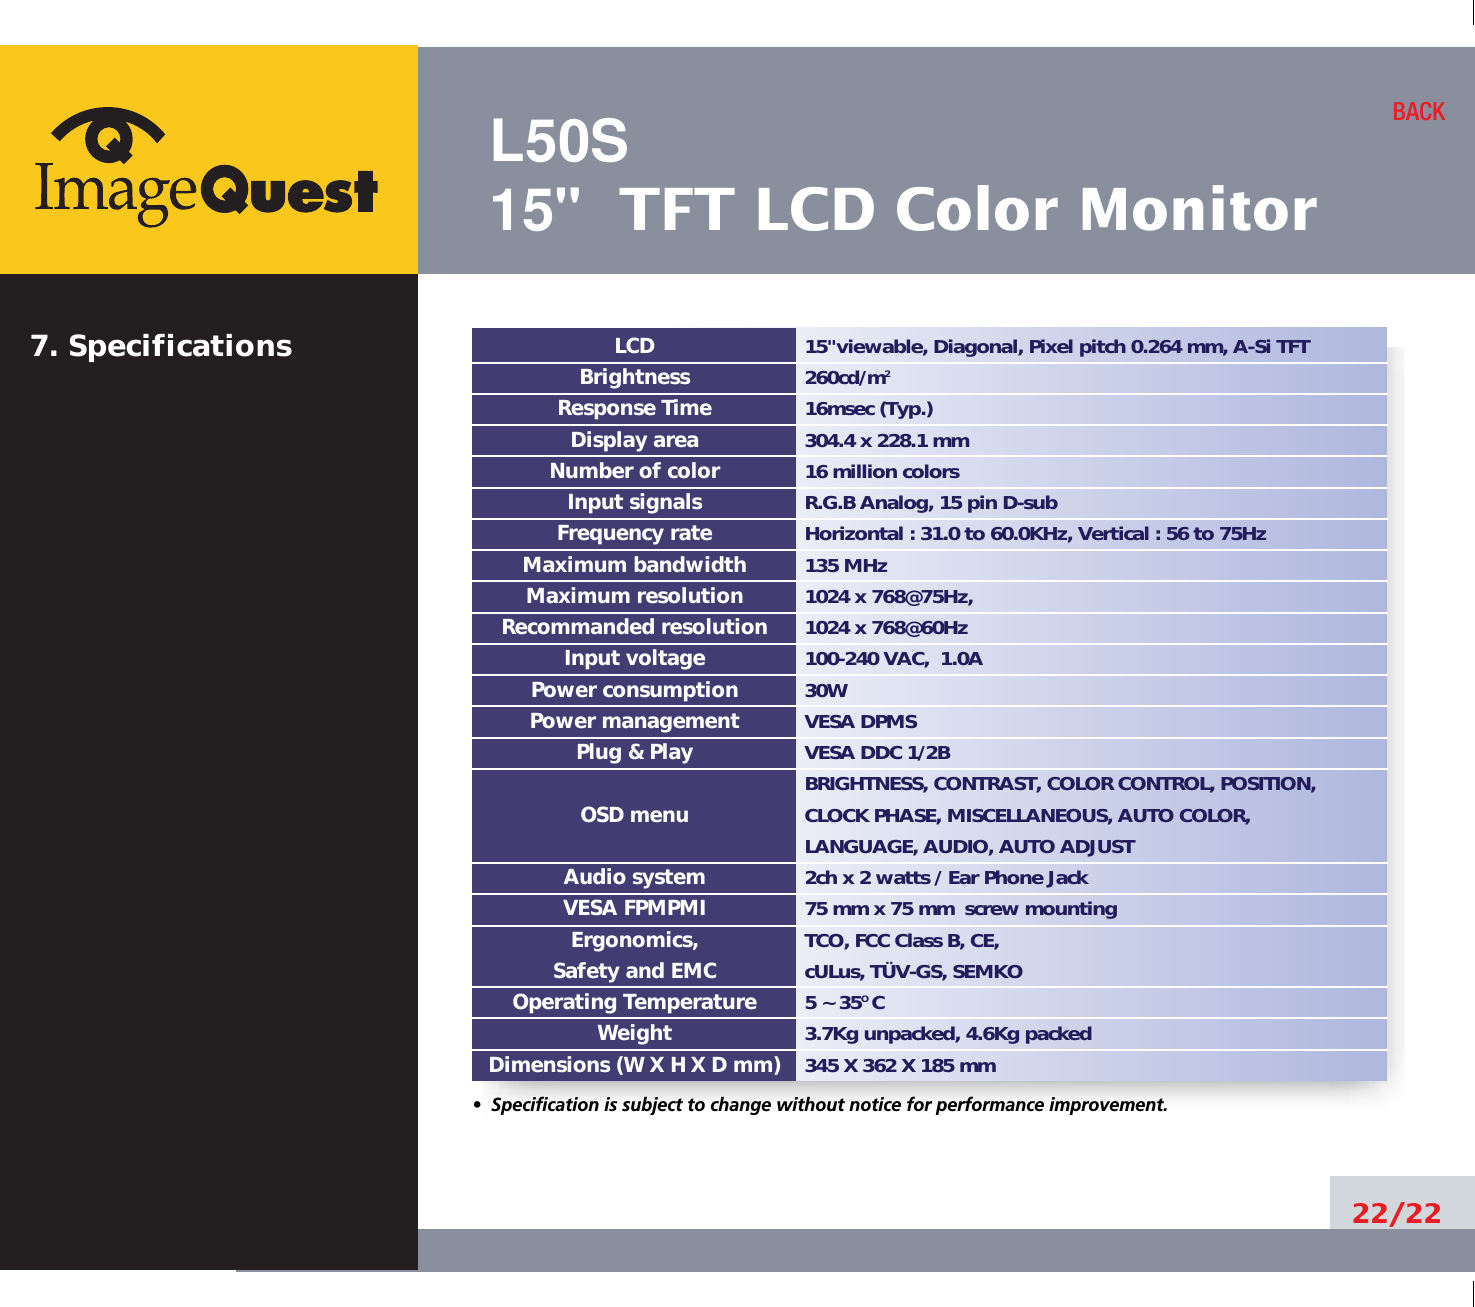 L50S15&quot; TFT LCD Color Monitor22/22BACK15&quot;viewable, Diagonal, Pixel pitch 0.264 mm, A-Si TFT260cd/m216msec (Typ.)304.4 x 228.1 mm16 million colorsR.G.B Analog, 15 pin D-subHorizontal : 31.0 to 60.0KHz, Vertical : 56 to 75Hz135 MHz1024 x 768@75Hz, 1024 x 768@60Hz100-240 VAC,  1.0A30W VESA DPMSVESA DDC 1/2BBRIGHTNESS, CONTRAST, COLOR CONTROL, POSITION, CLOCK PHASE, MISCELLANEOUS, AUTO COLOR, LANGUAGE, AUDIO, AUTO ADJUST2ch x 2 watts / Ear Phone Jack75 mm x 75 mm  screw mountingTCO, FCC Class B, CE,cULus, TÜV-GS, SEMKO5 ~ 35O C3.7Kg unpacked, 4.6Kg packed345 X 362 X 185 mmLCDBrightnessResponse TimeDisplay areaNumber of colorInput signalsFrequency rateMaximum bandwidthMaximum resolutionRecommanded resolutionInput voltagePower consumptionPower managementPlug &amp; PlayOSD menuAudio systemVESA FPMPMIErgonomics,Safety and EMCOperating TemperatureWeightDimensions (W X H X D mm)•  Specification is subject to change without notice for performance improvement.7. Specifications